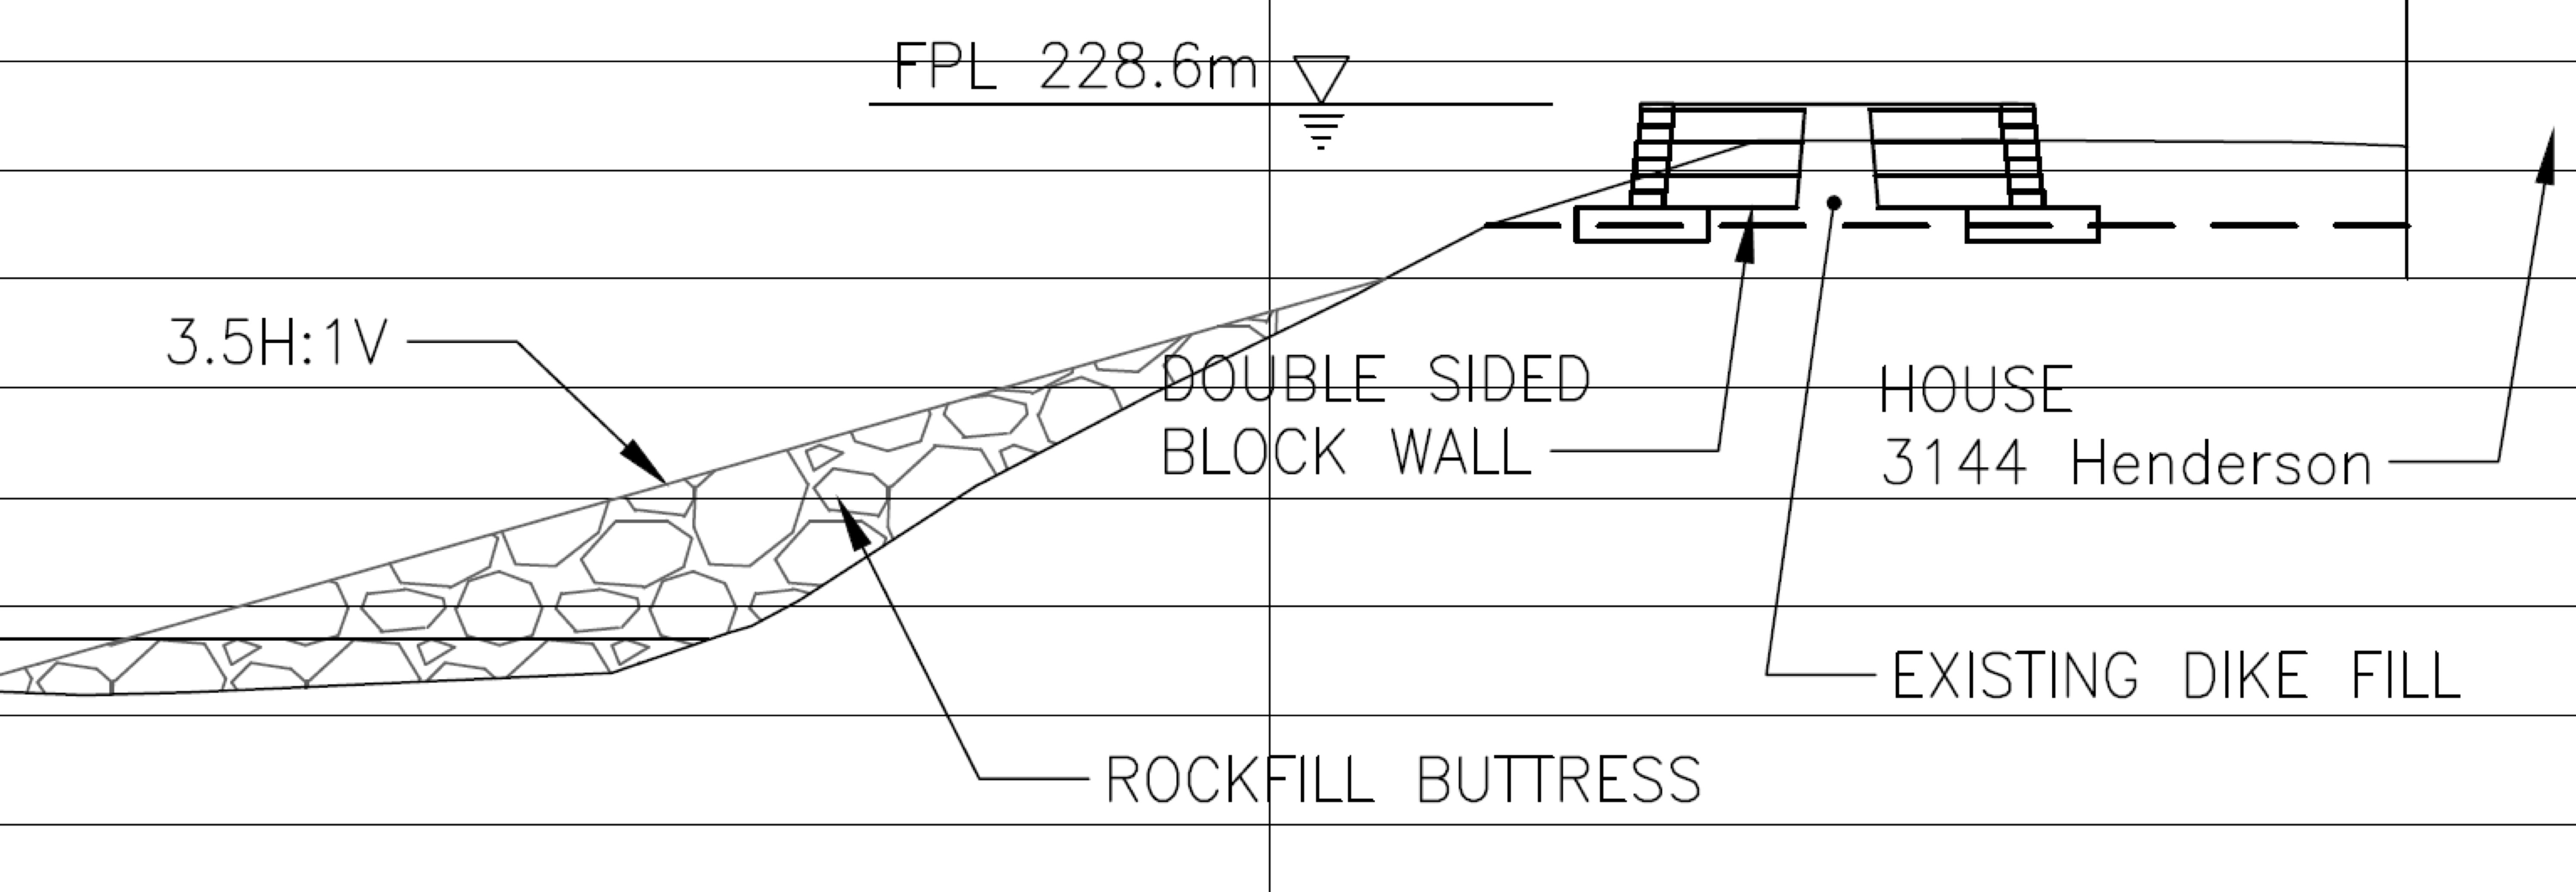 Retaining Wall detail with double sided block walls